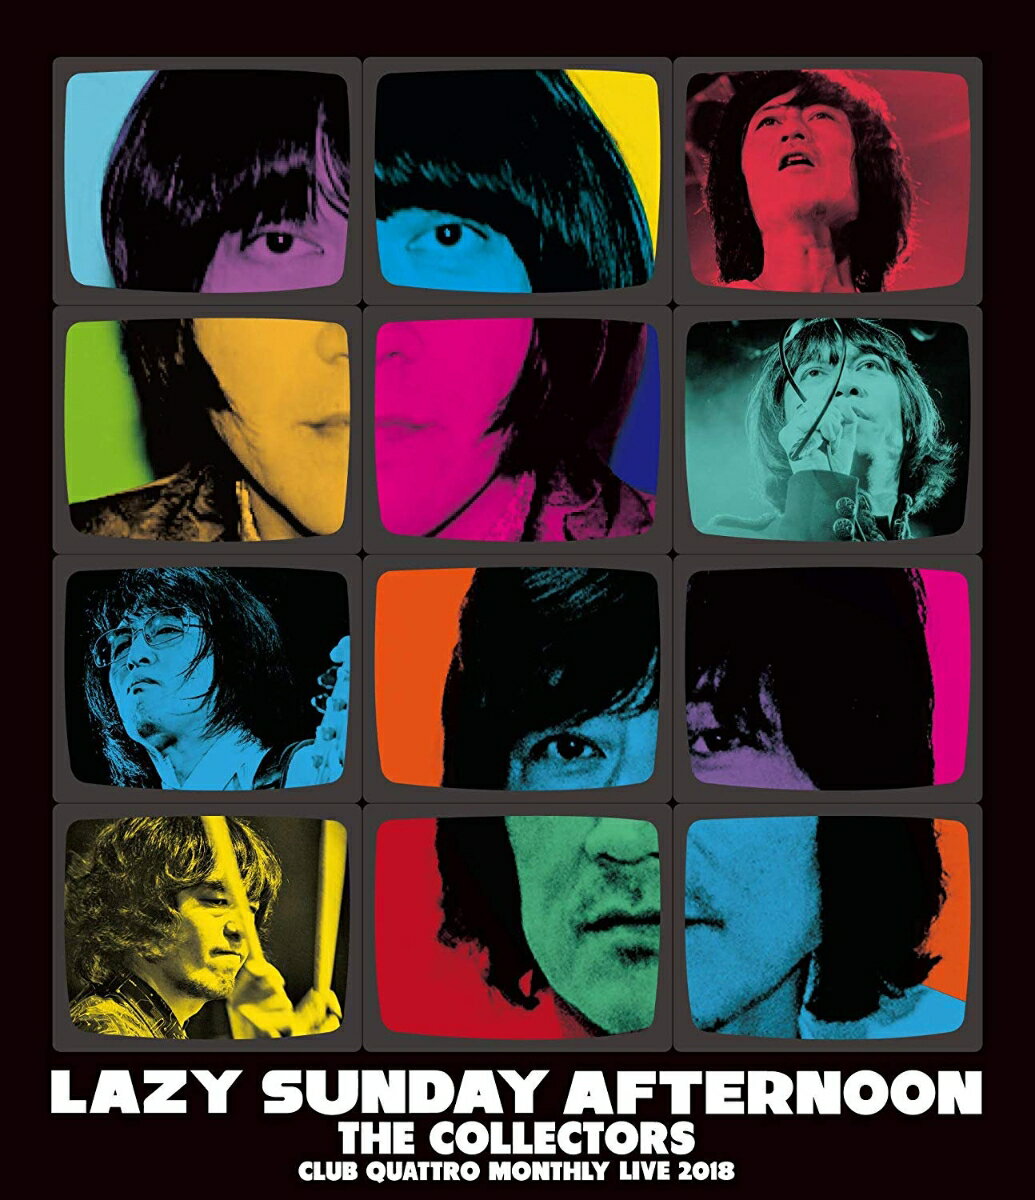 CLUB QUATTRO MONTHLY LIVE 2018 “LAZY SUNDAY AFTERNOON”【Blu-ray】 [ THE COLLECTORS ]